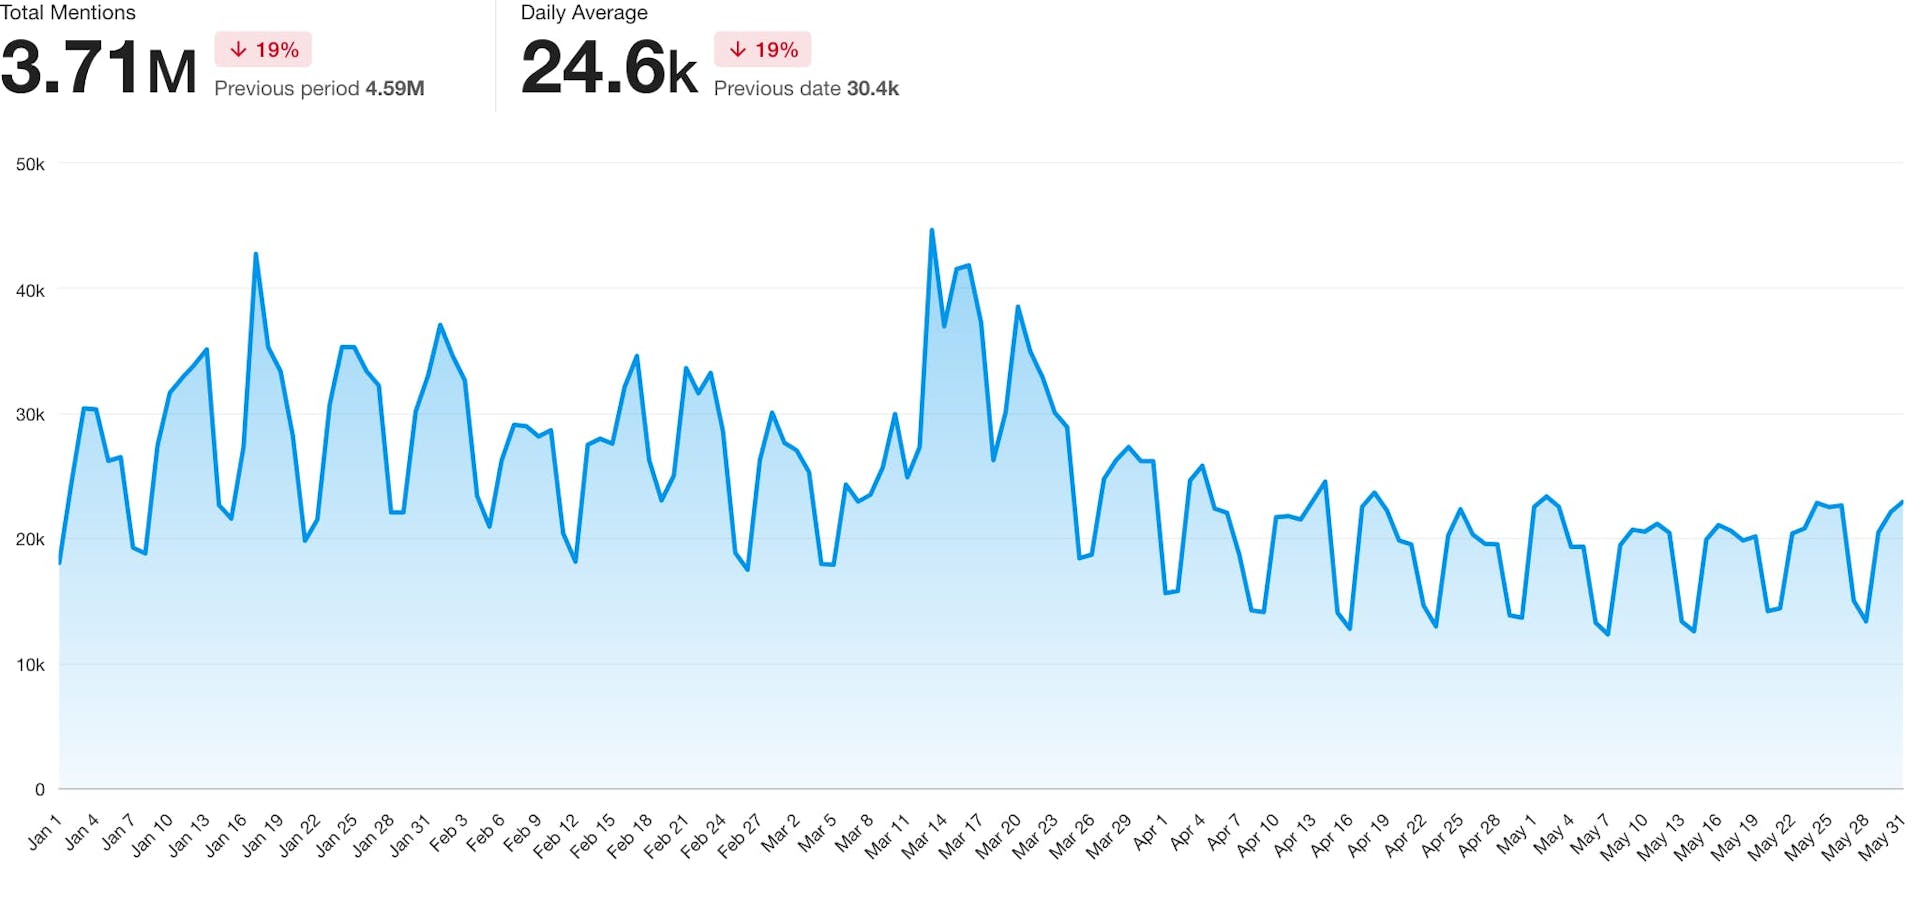 A line graph showing blog finance mentions over time, with 3.71M total mentions and a daily average of 24.6K mentions.